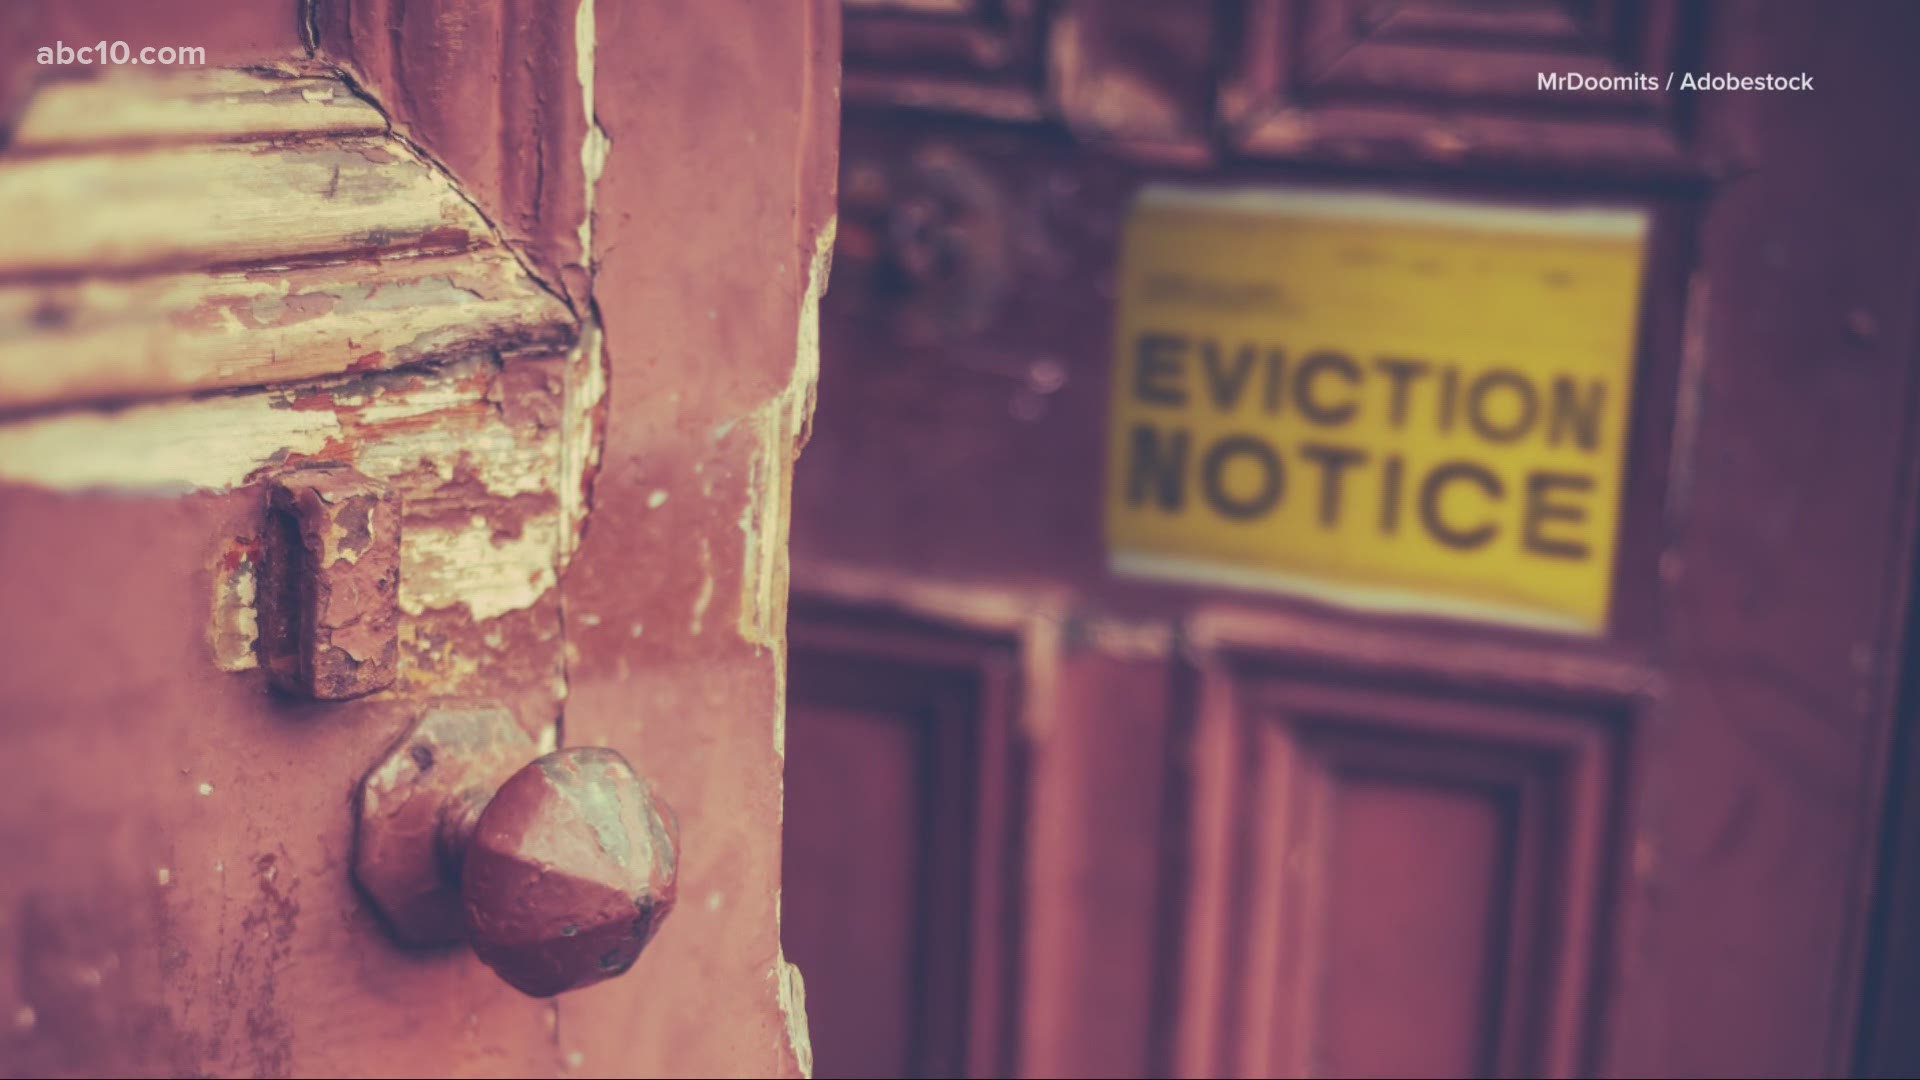 What you need to know about eviction moratoriums which are scheduled to end in the next few weeks. | Dollars and Sense